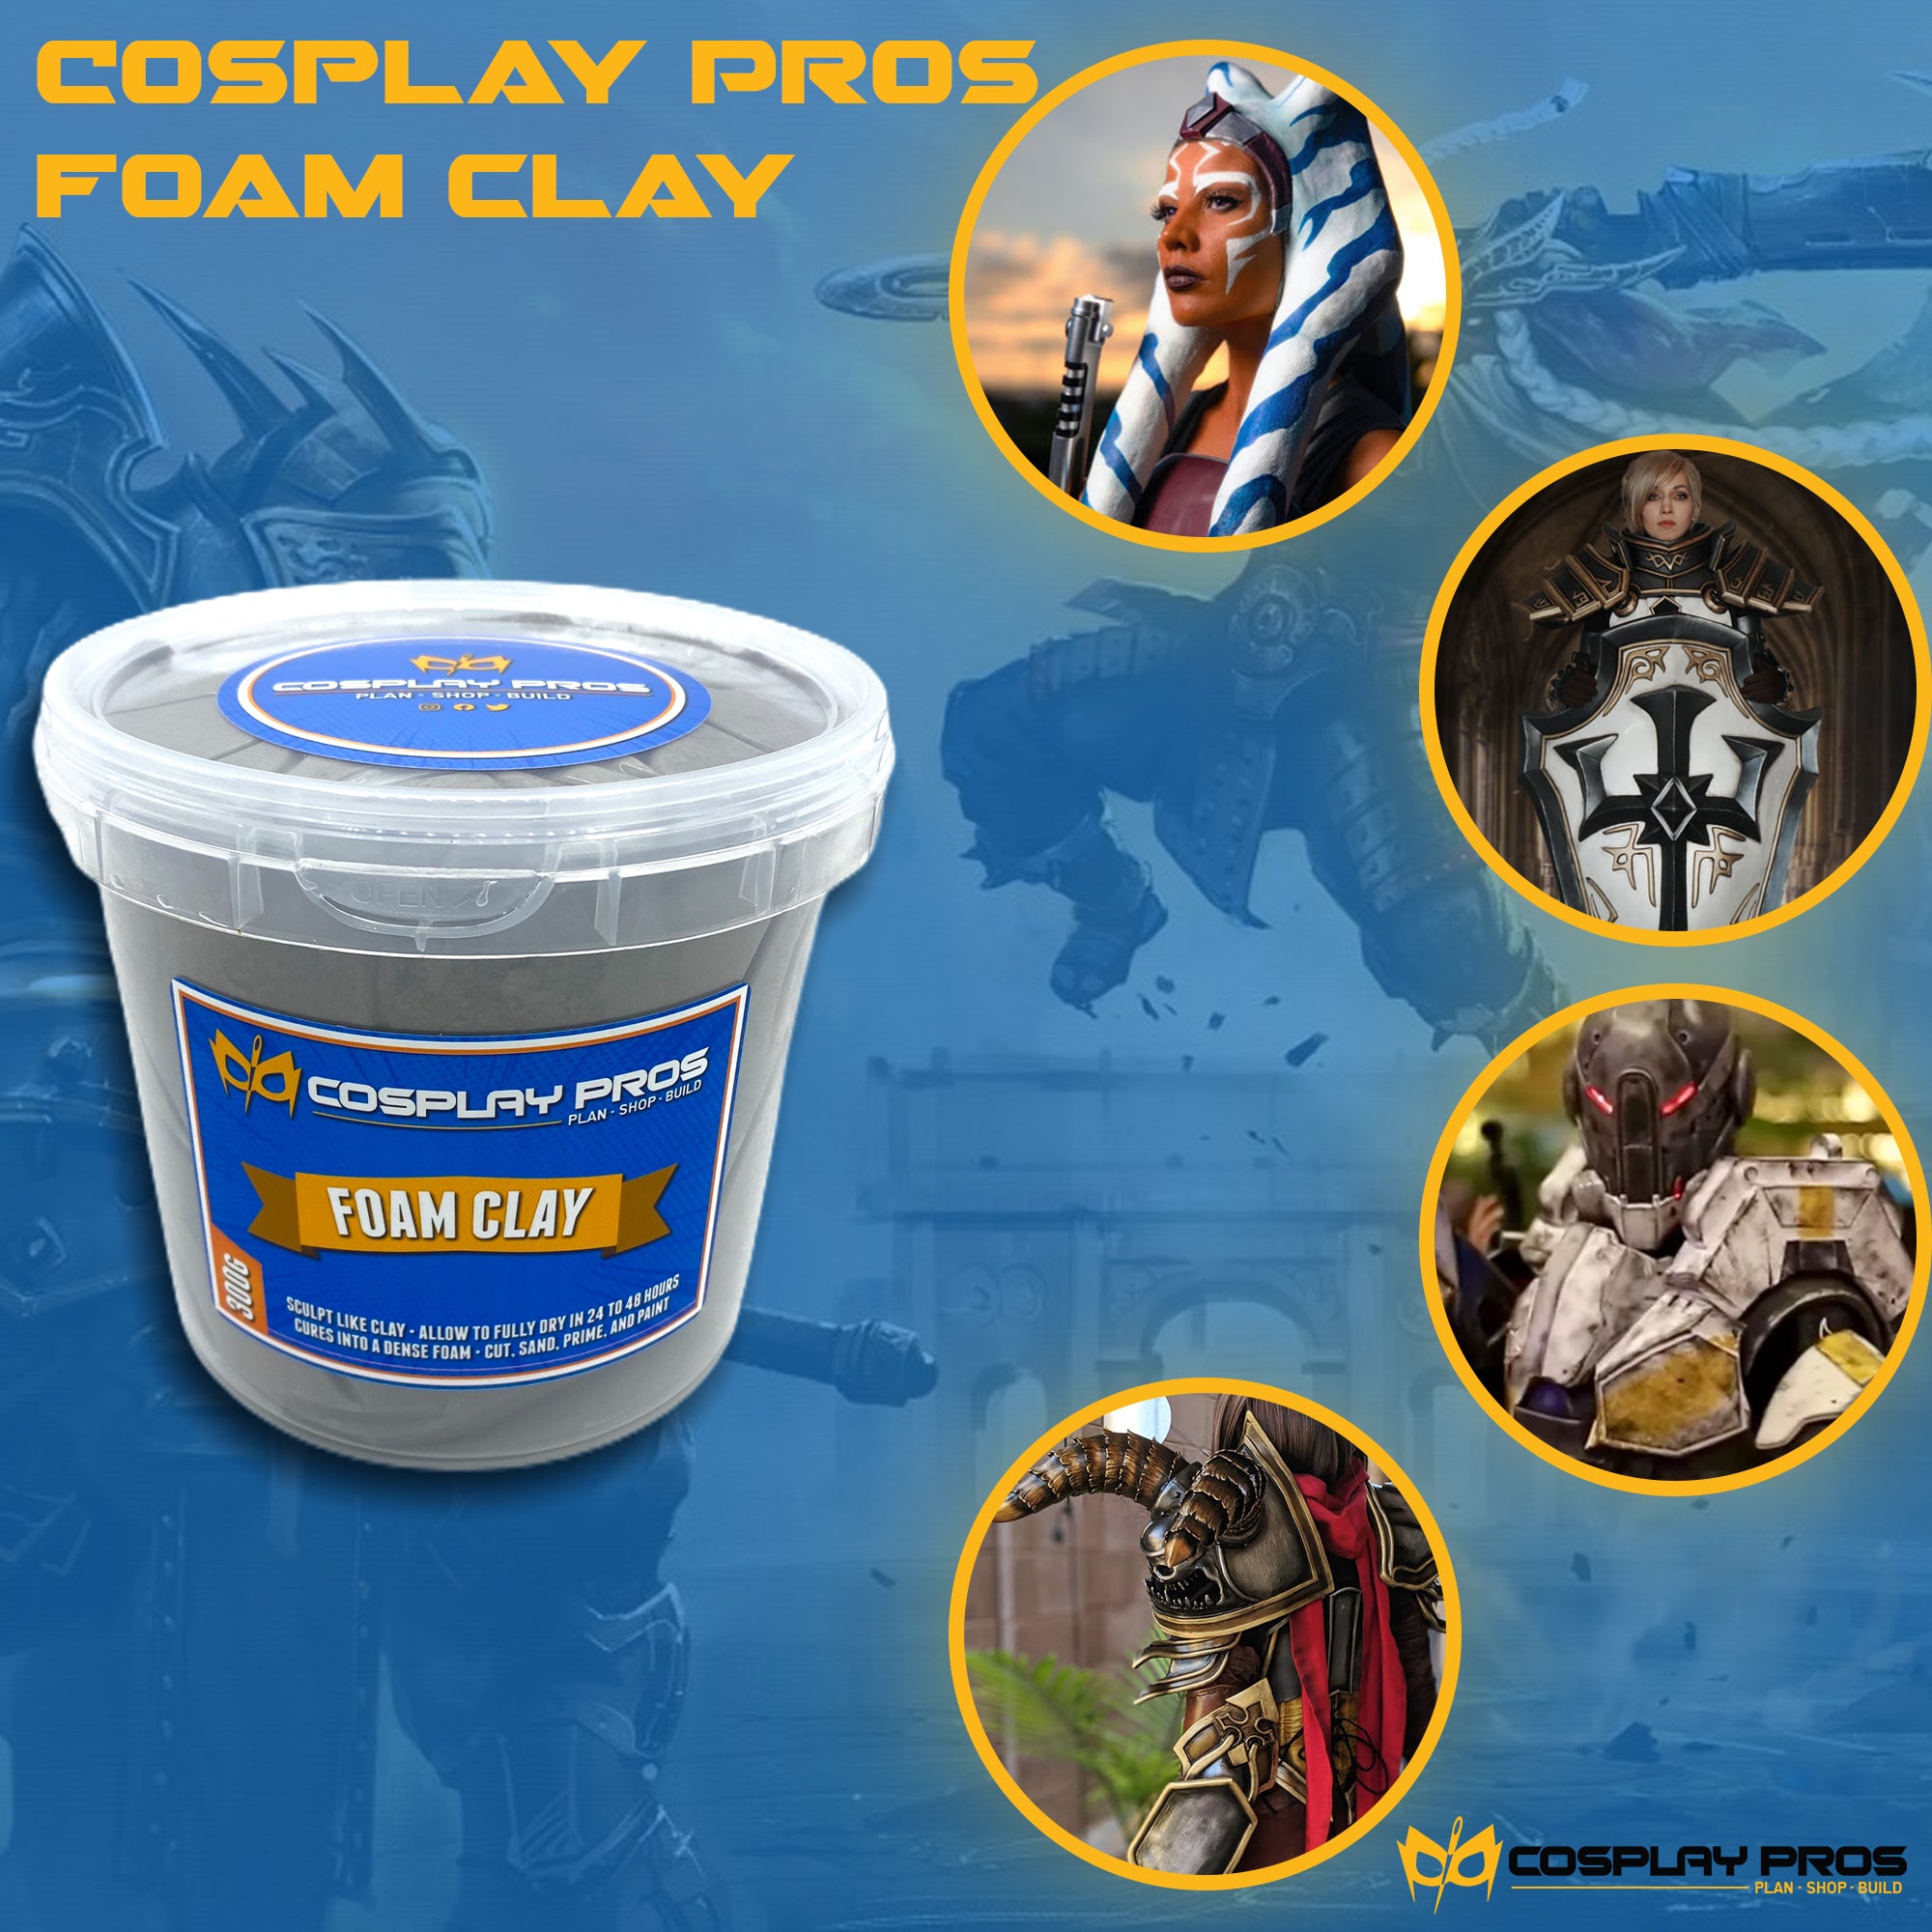 CalPalmy 33 lbs Moldable cosplay Foam clay (gray) - Air-Dry High Density  for Intricate Designs Dries